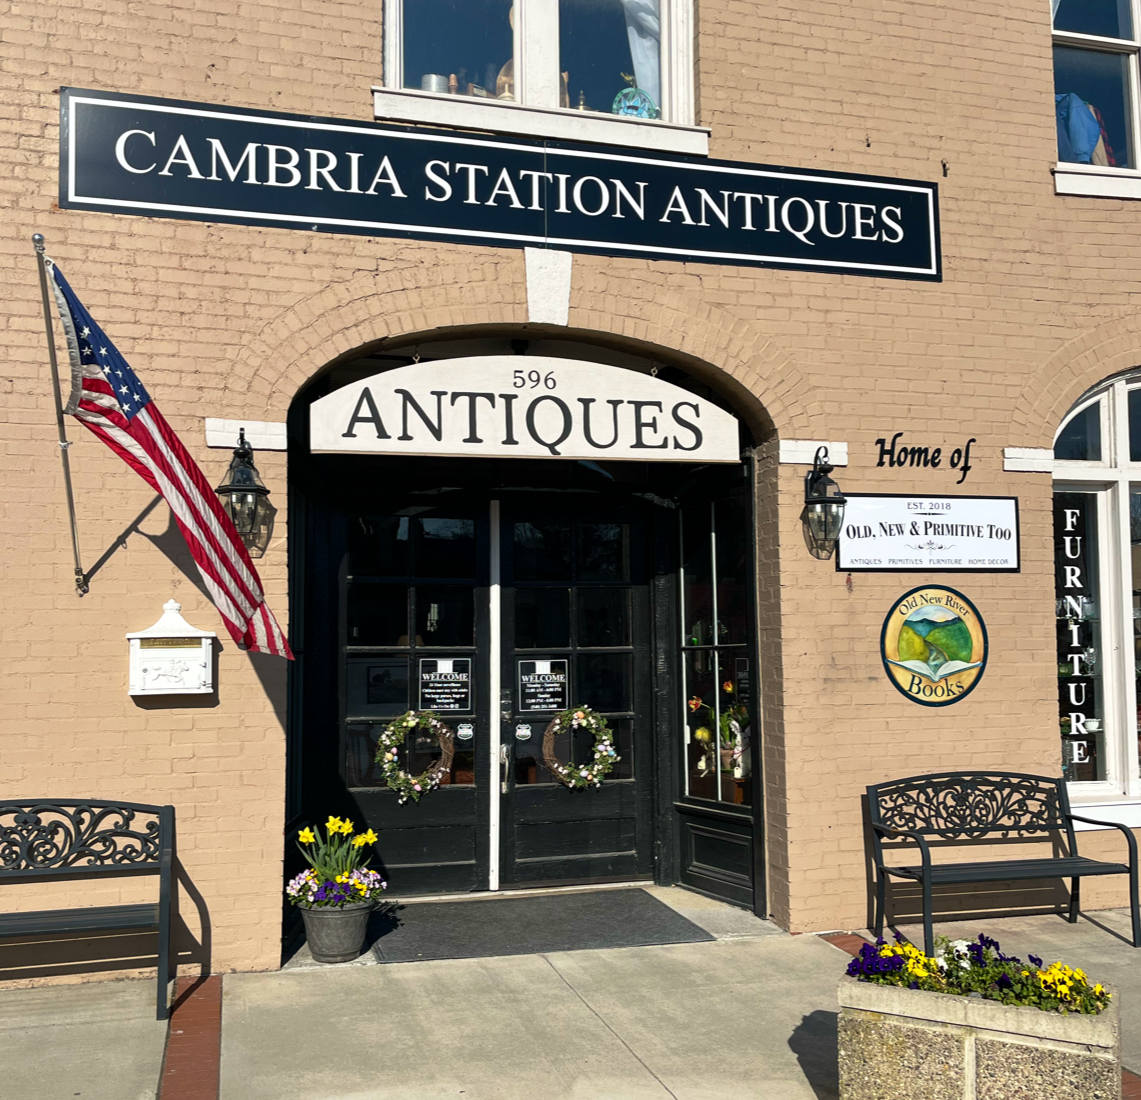 Cambria Station Antiques